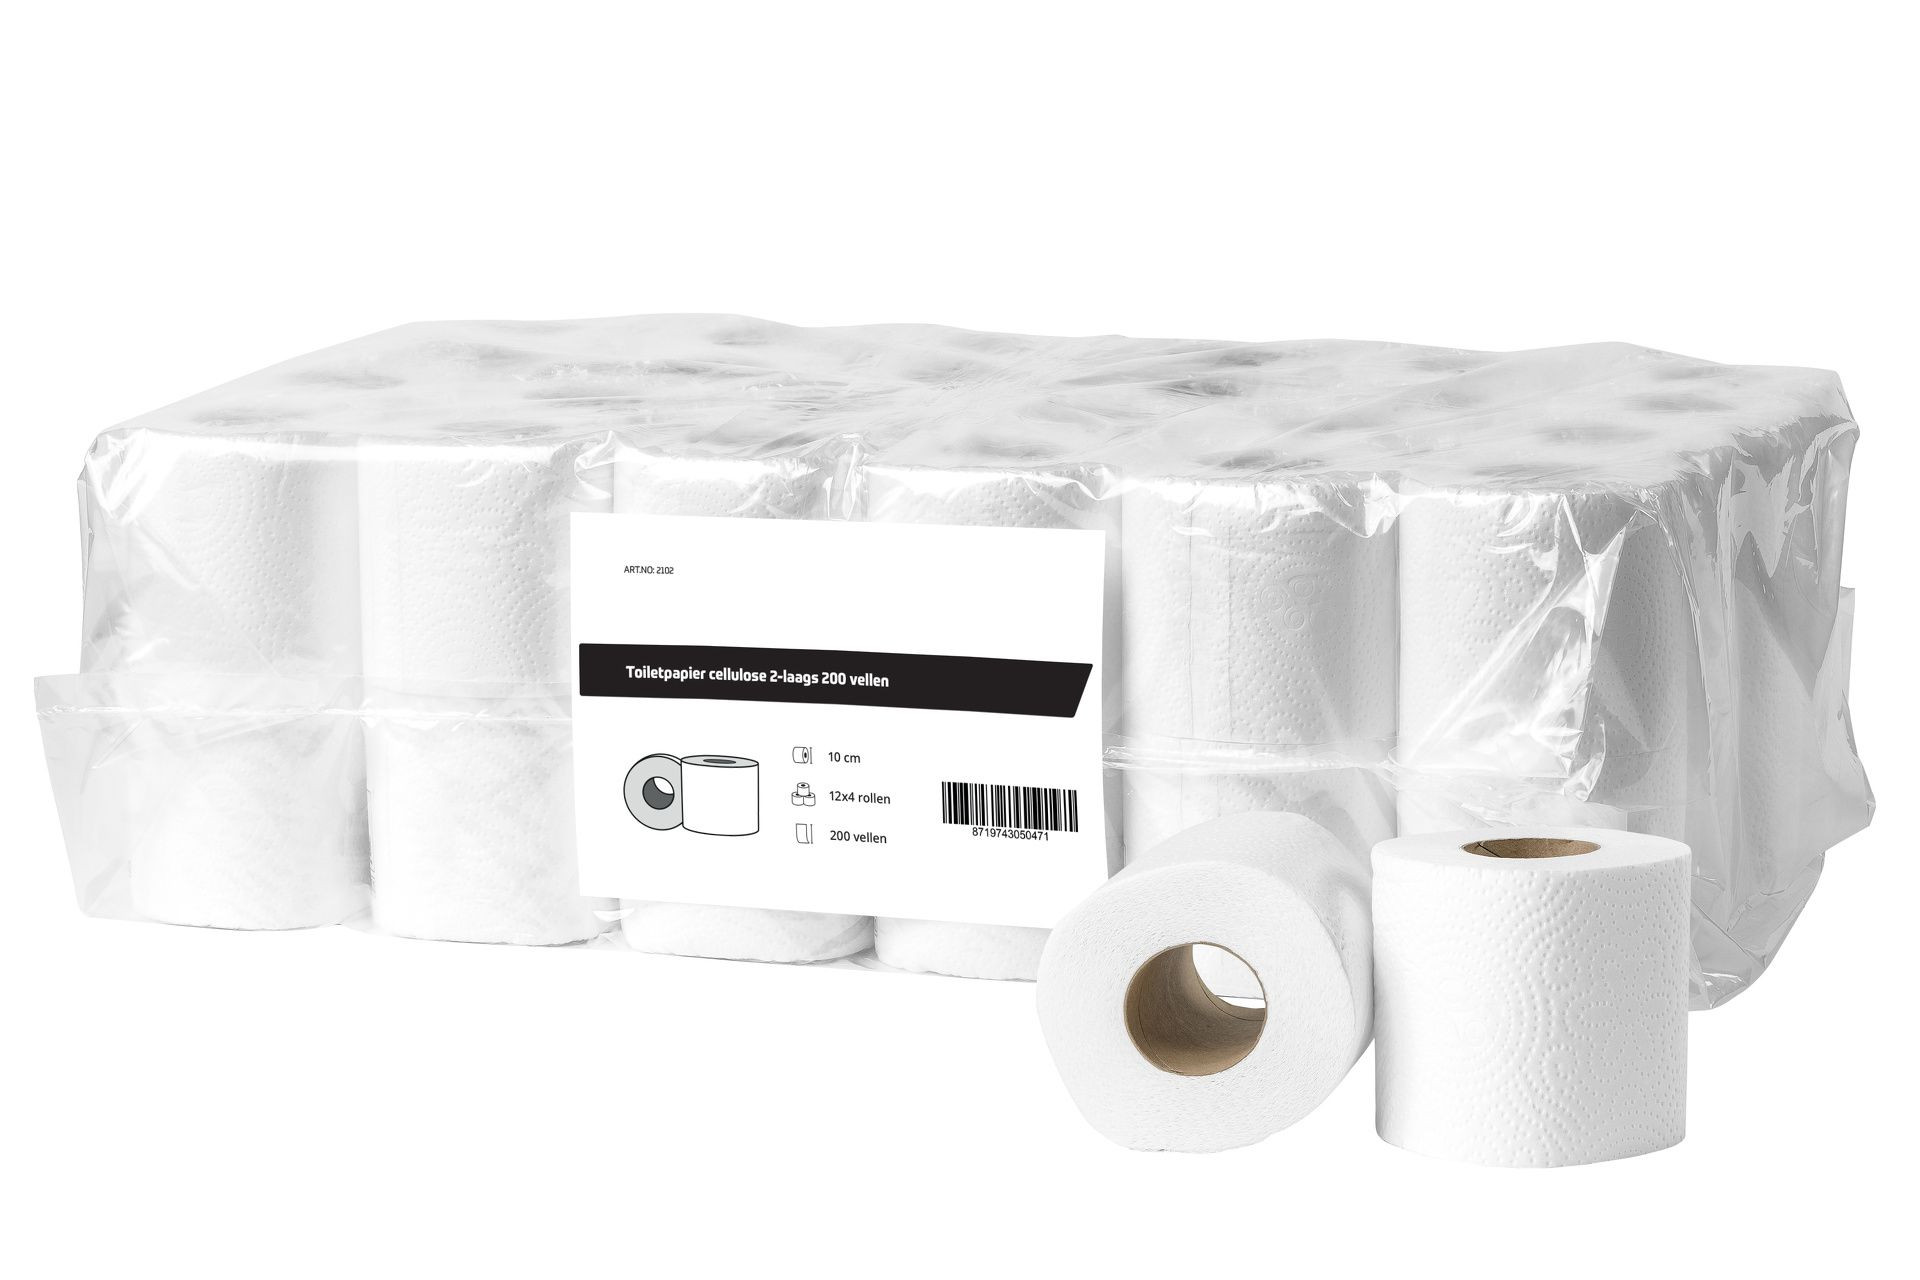 All Care Toiletpapier cellulose 2 laags/200 vel - 48 rollen